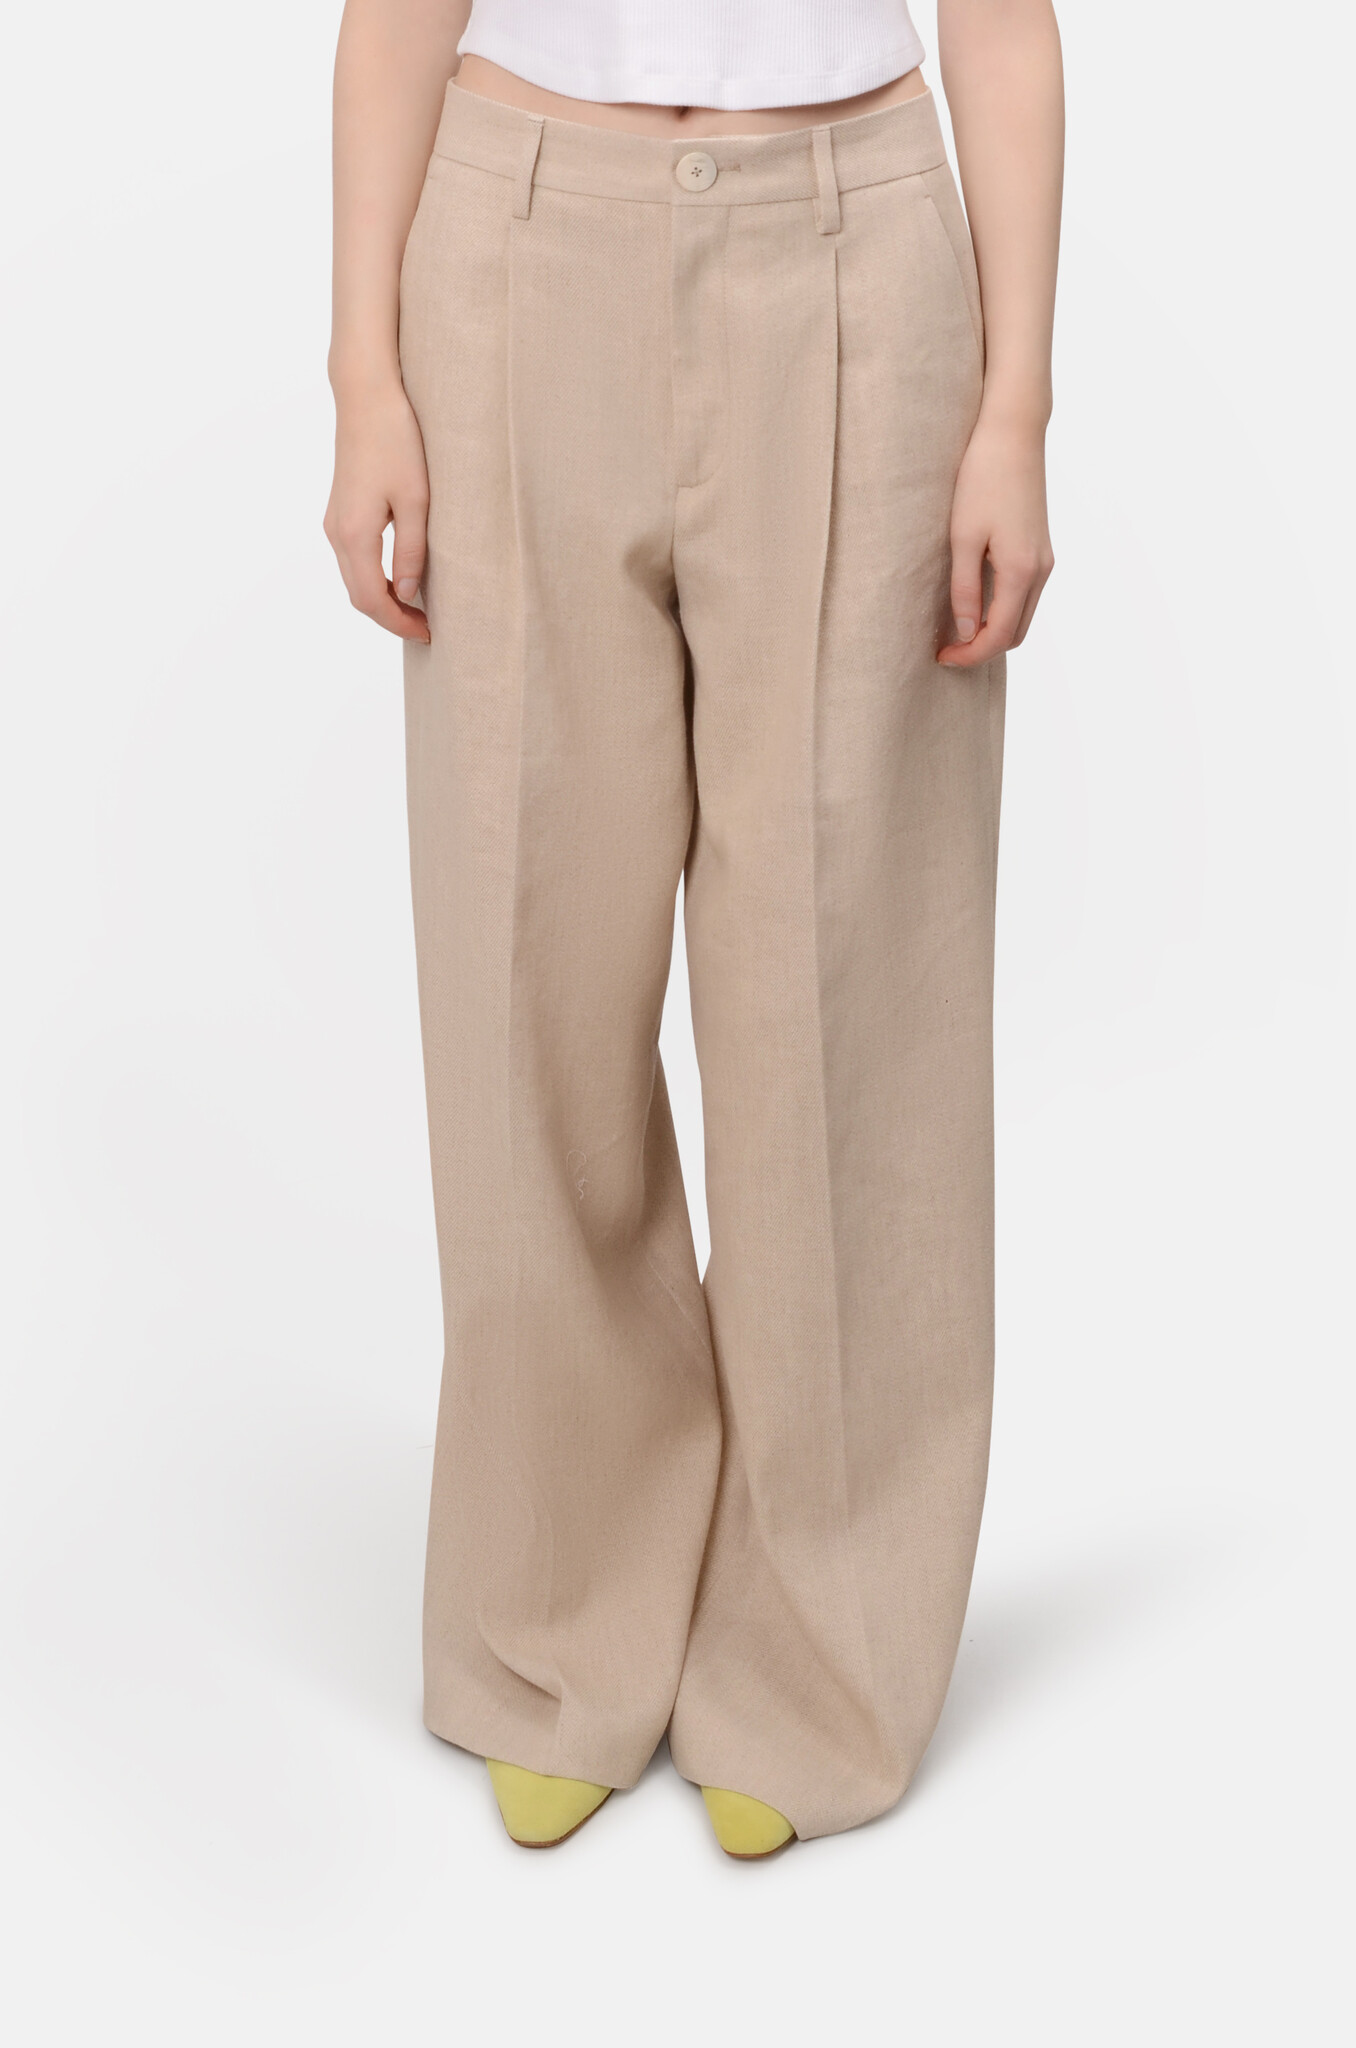 Radma Trousers in Natural-1